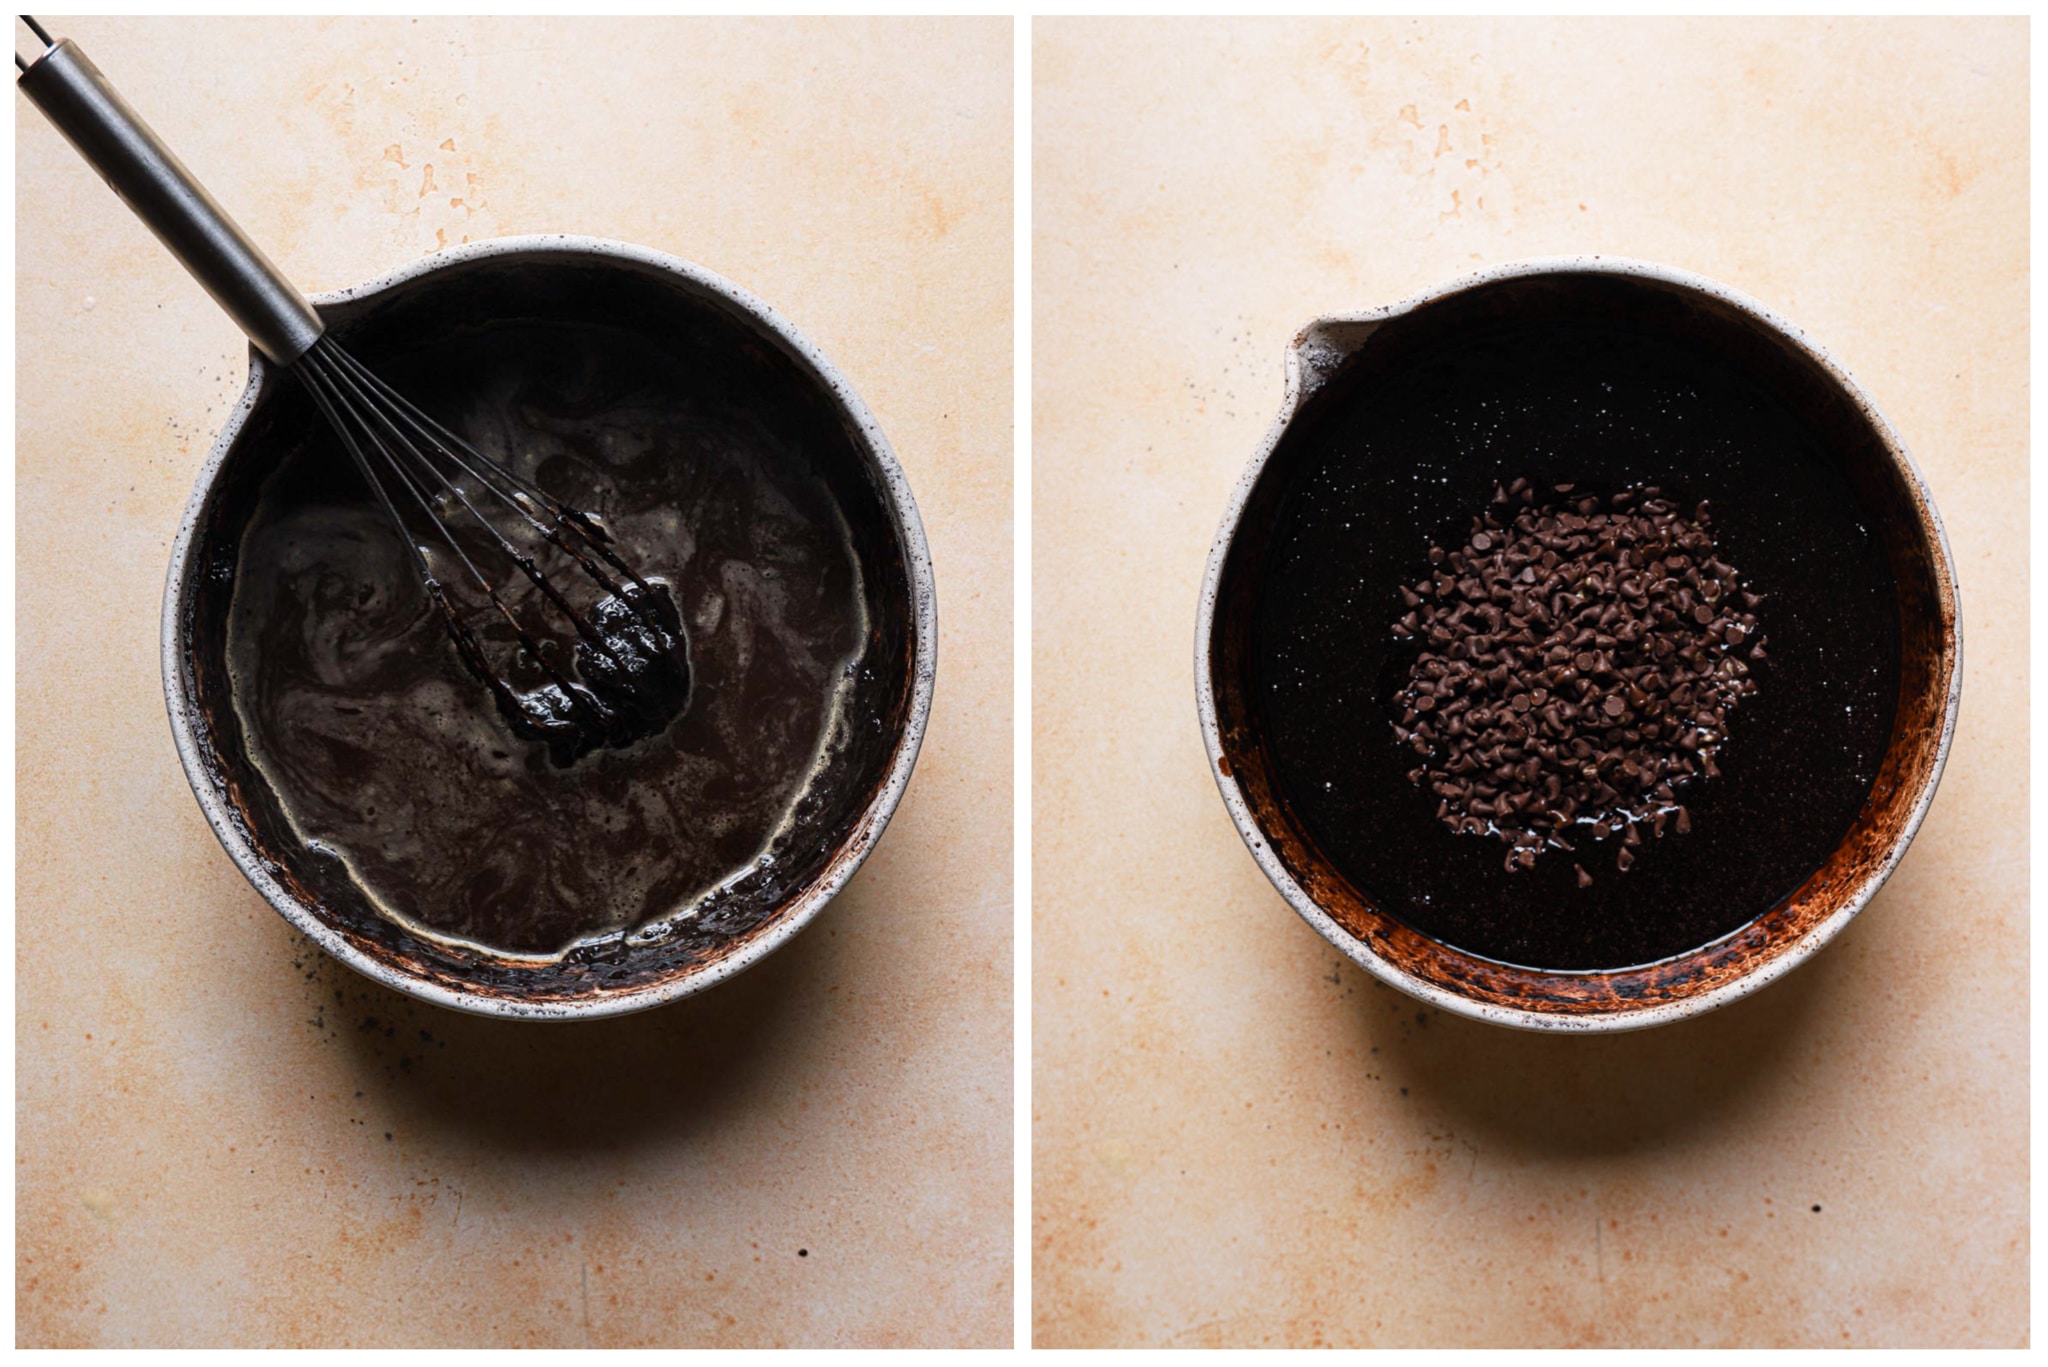 A side-by-side photo shows how to make cupcakes. On the left is the chocolate cupcake batter, on the right, the mini chocolate chips have been added and are ready to be folded into the batter.